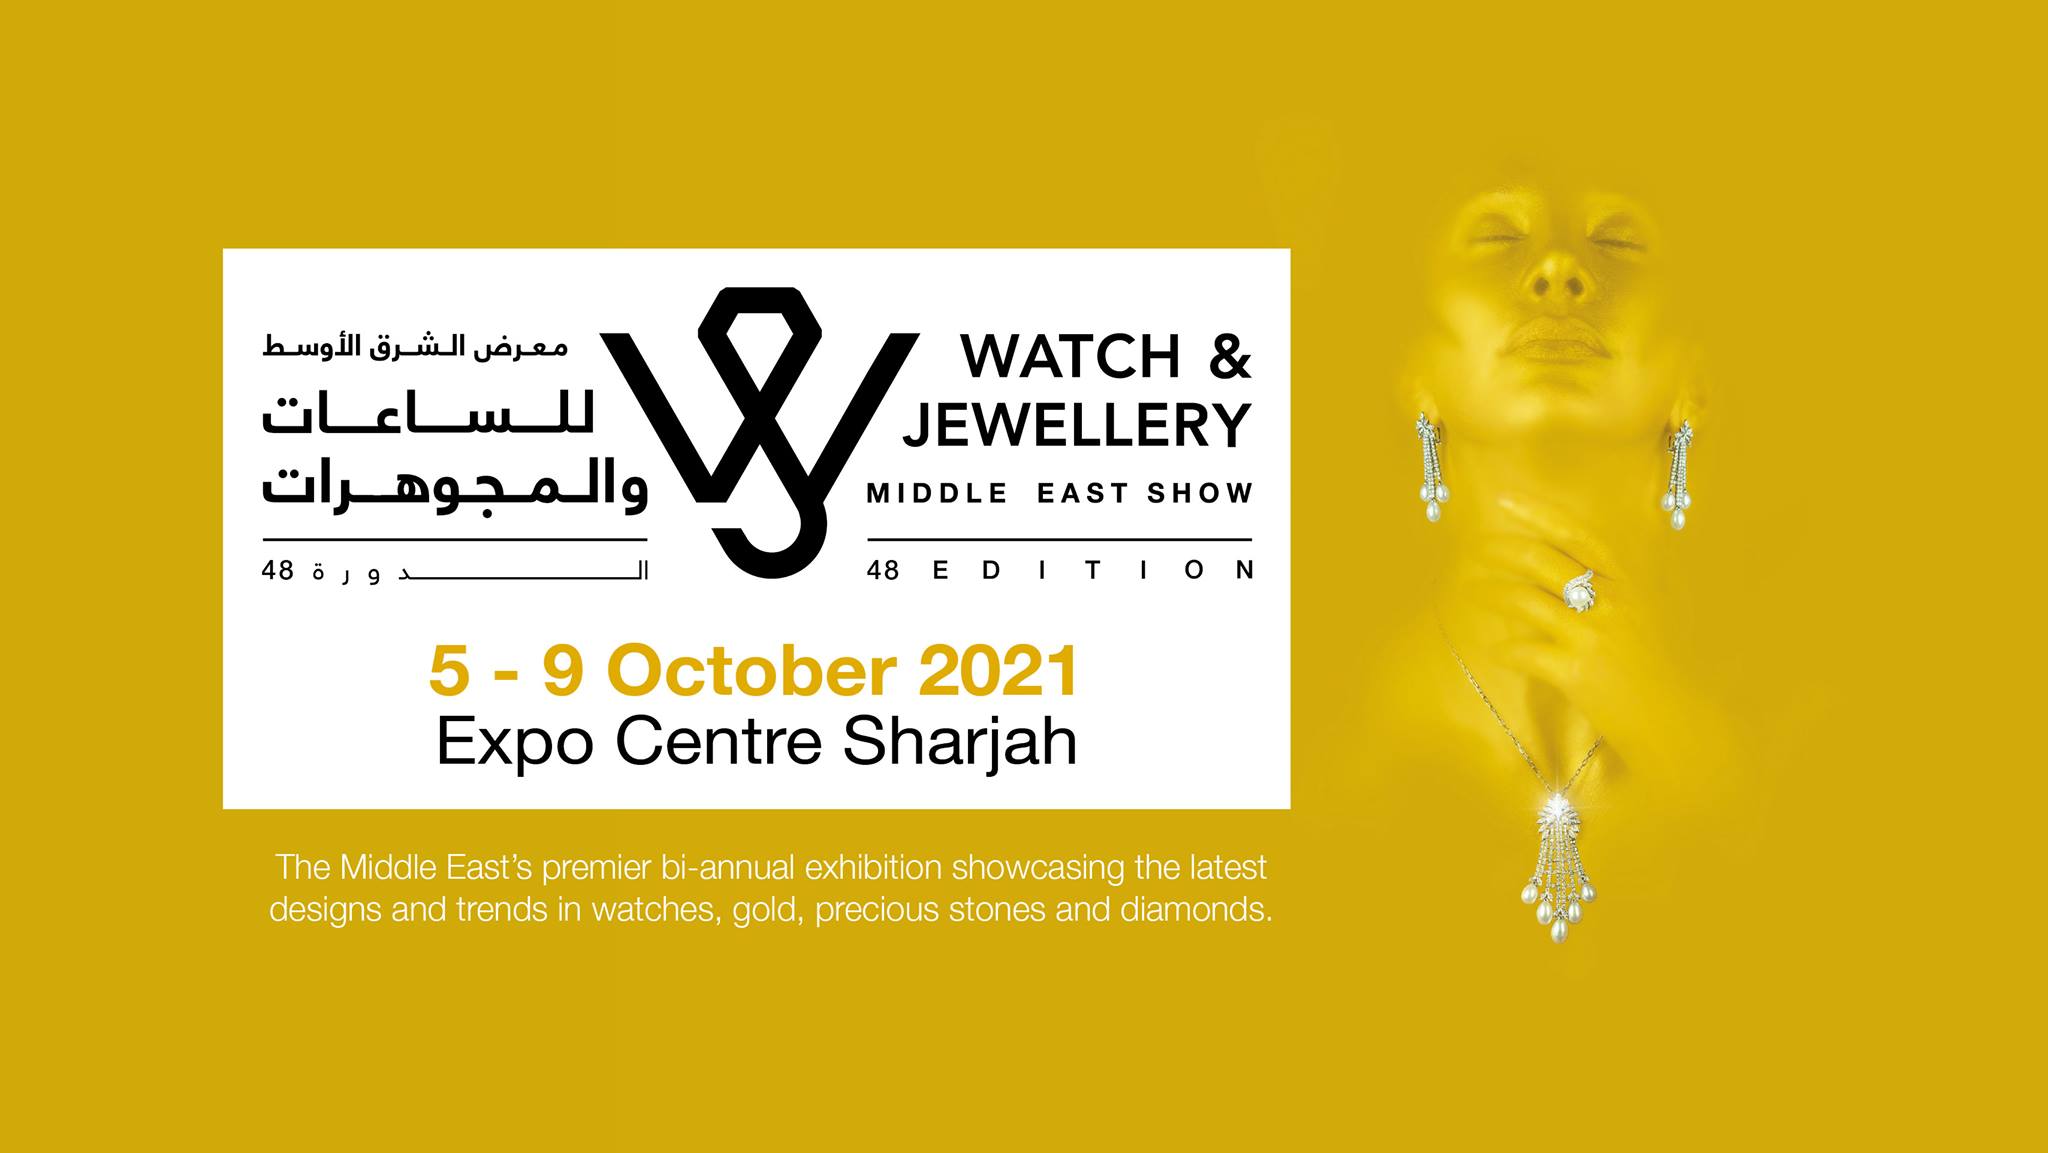 Watch & Jewellery Middle East Show